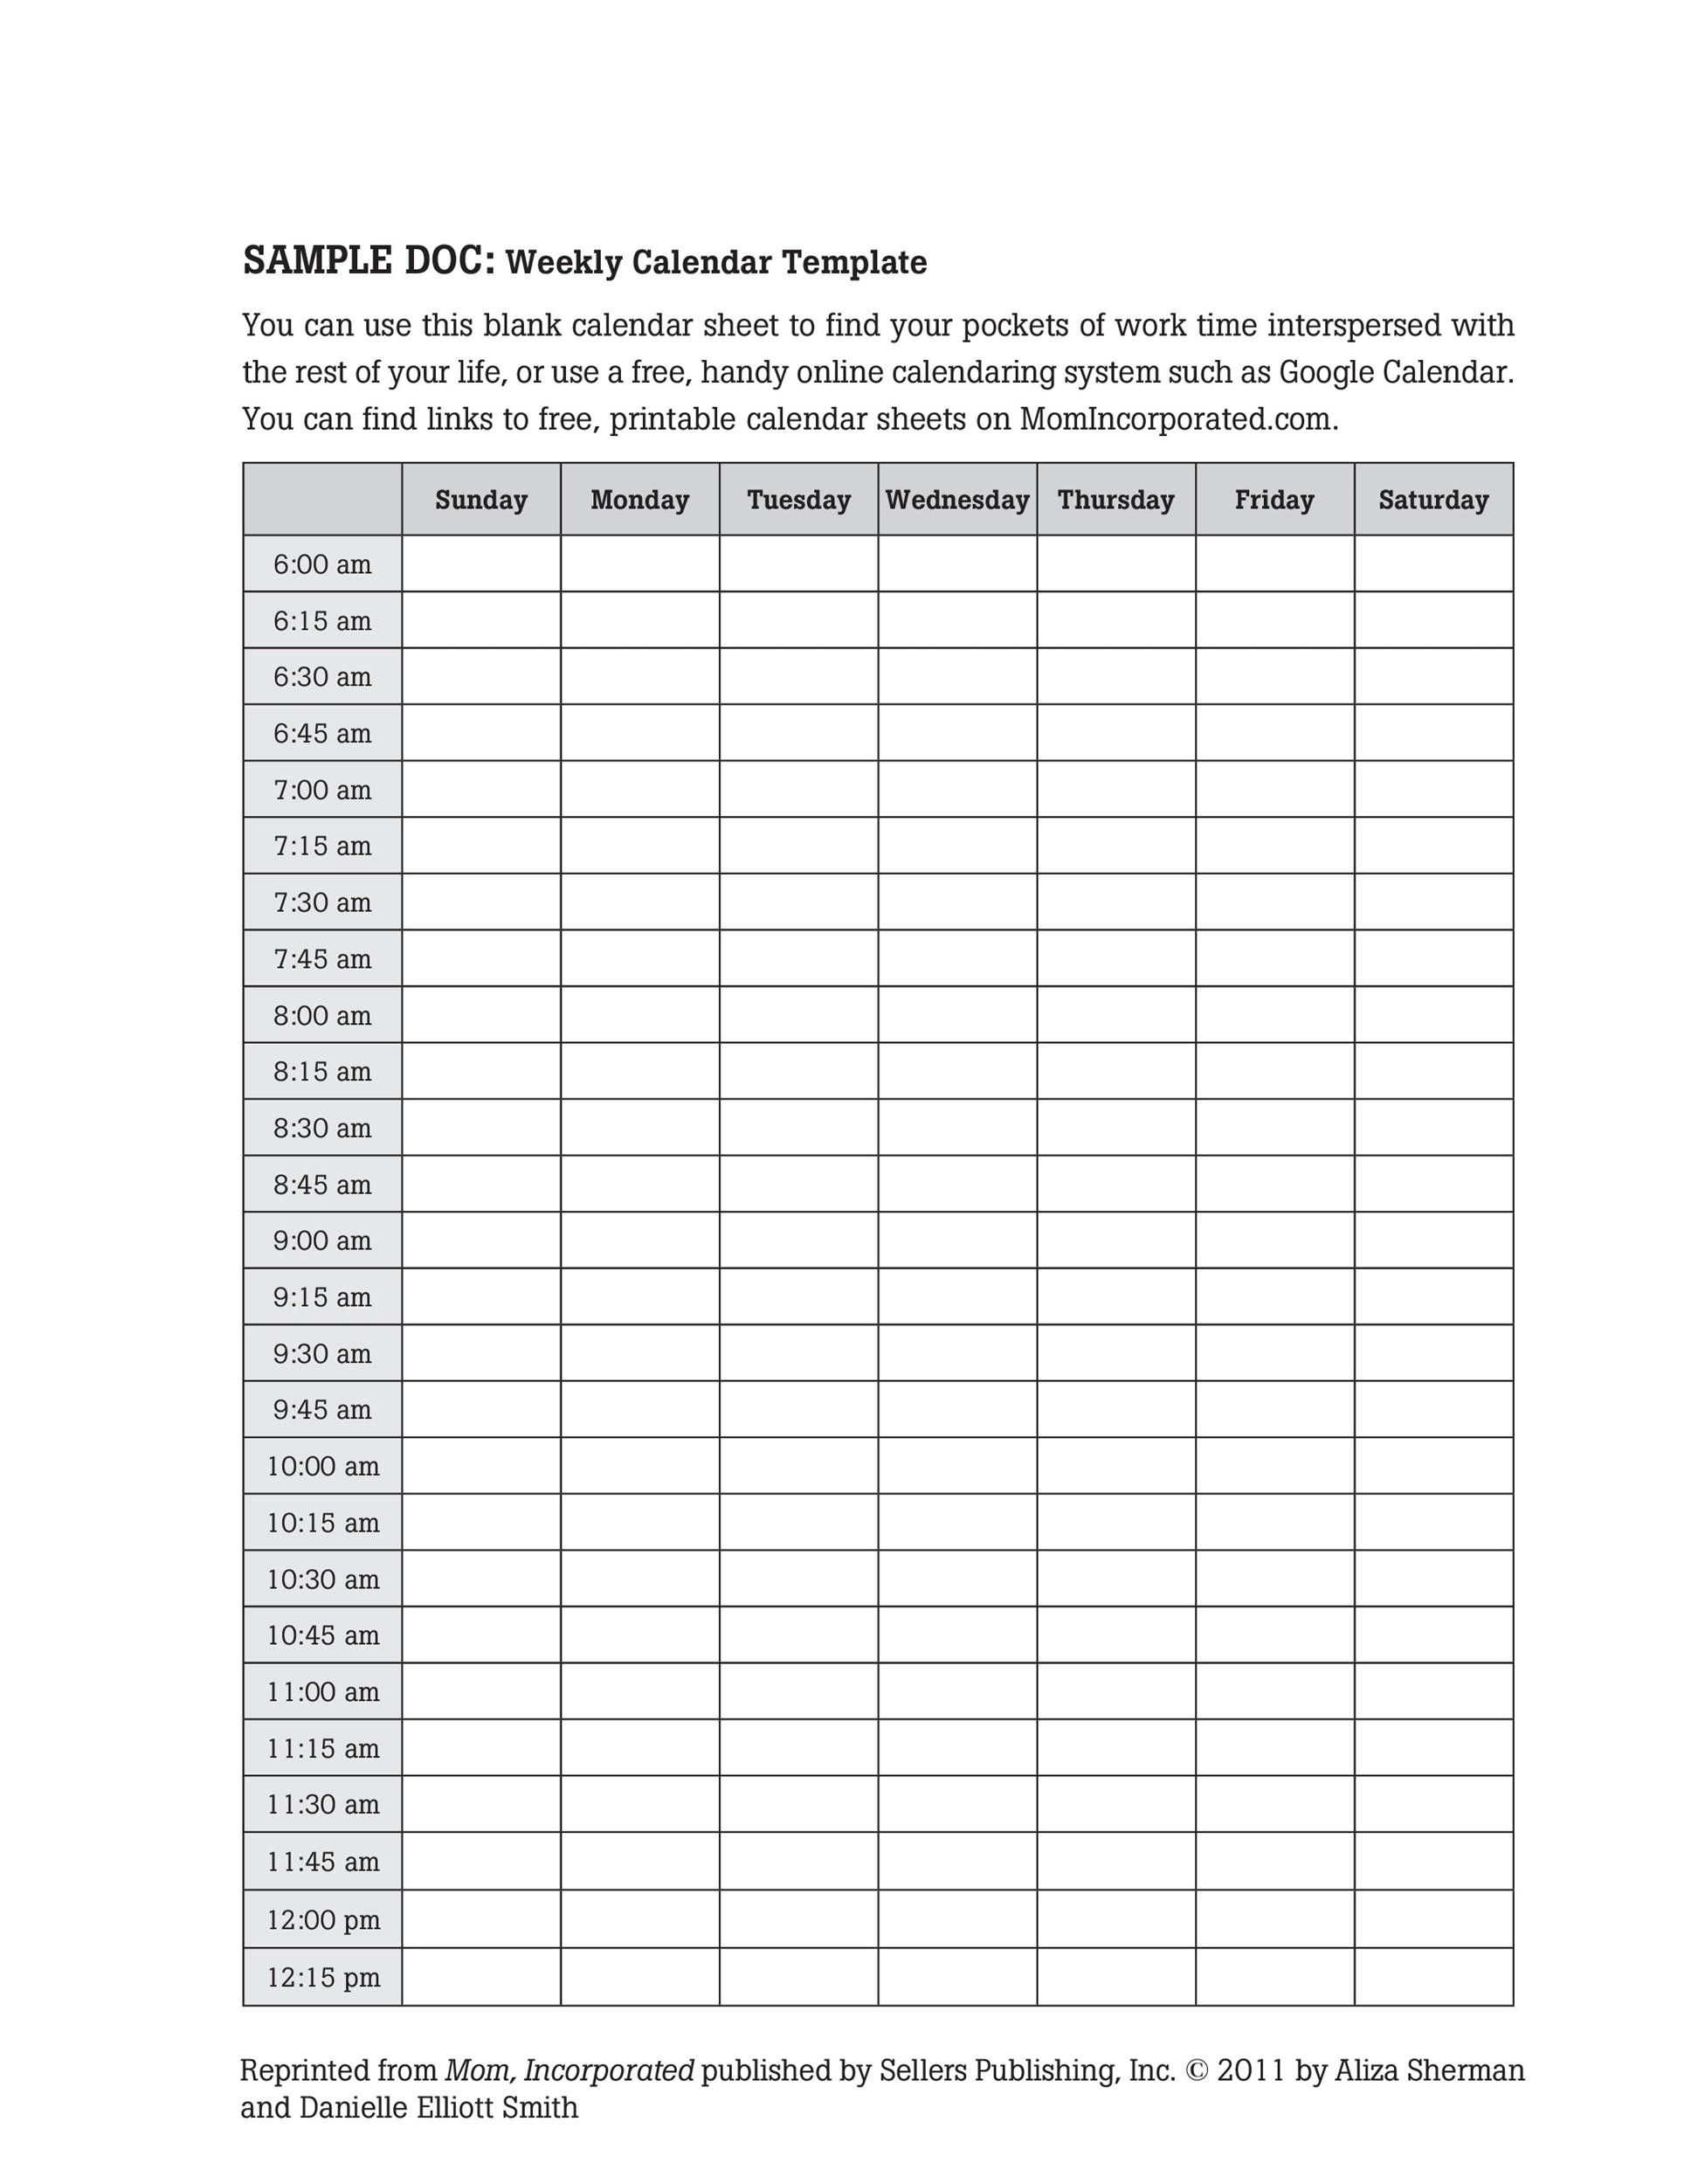 blank-schedule-with-15-minute-increments-example-calendar-printable